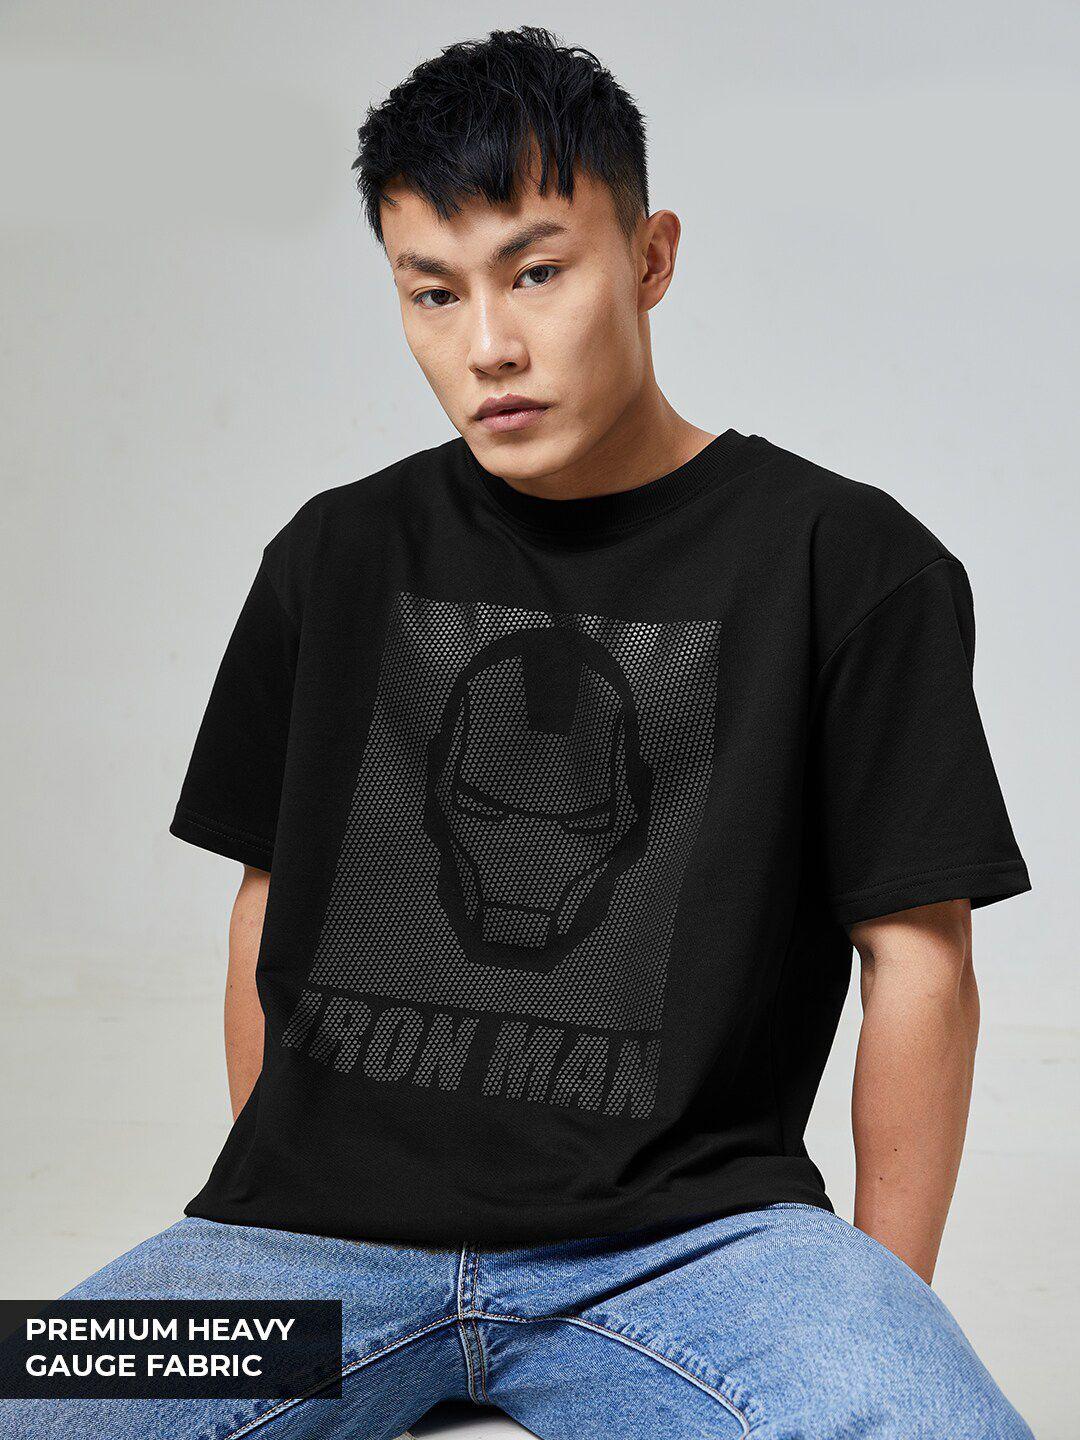 the souled store men black & french middle red purple iron man printed applique loose t-shirt